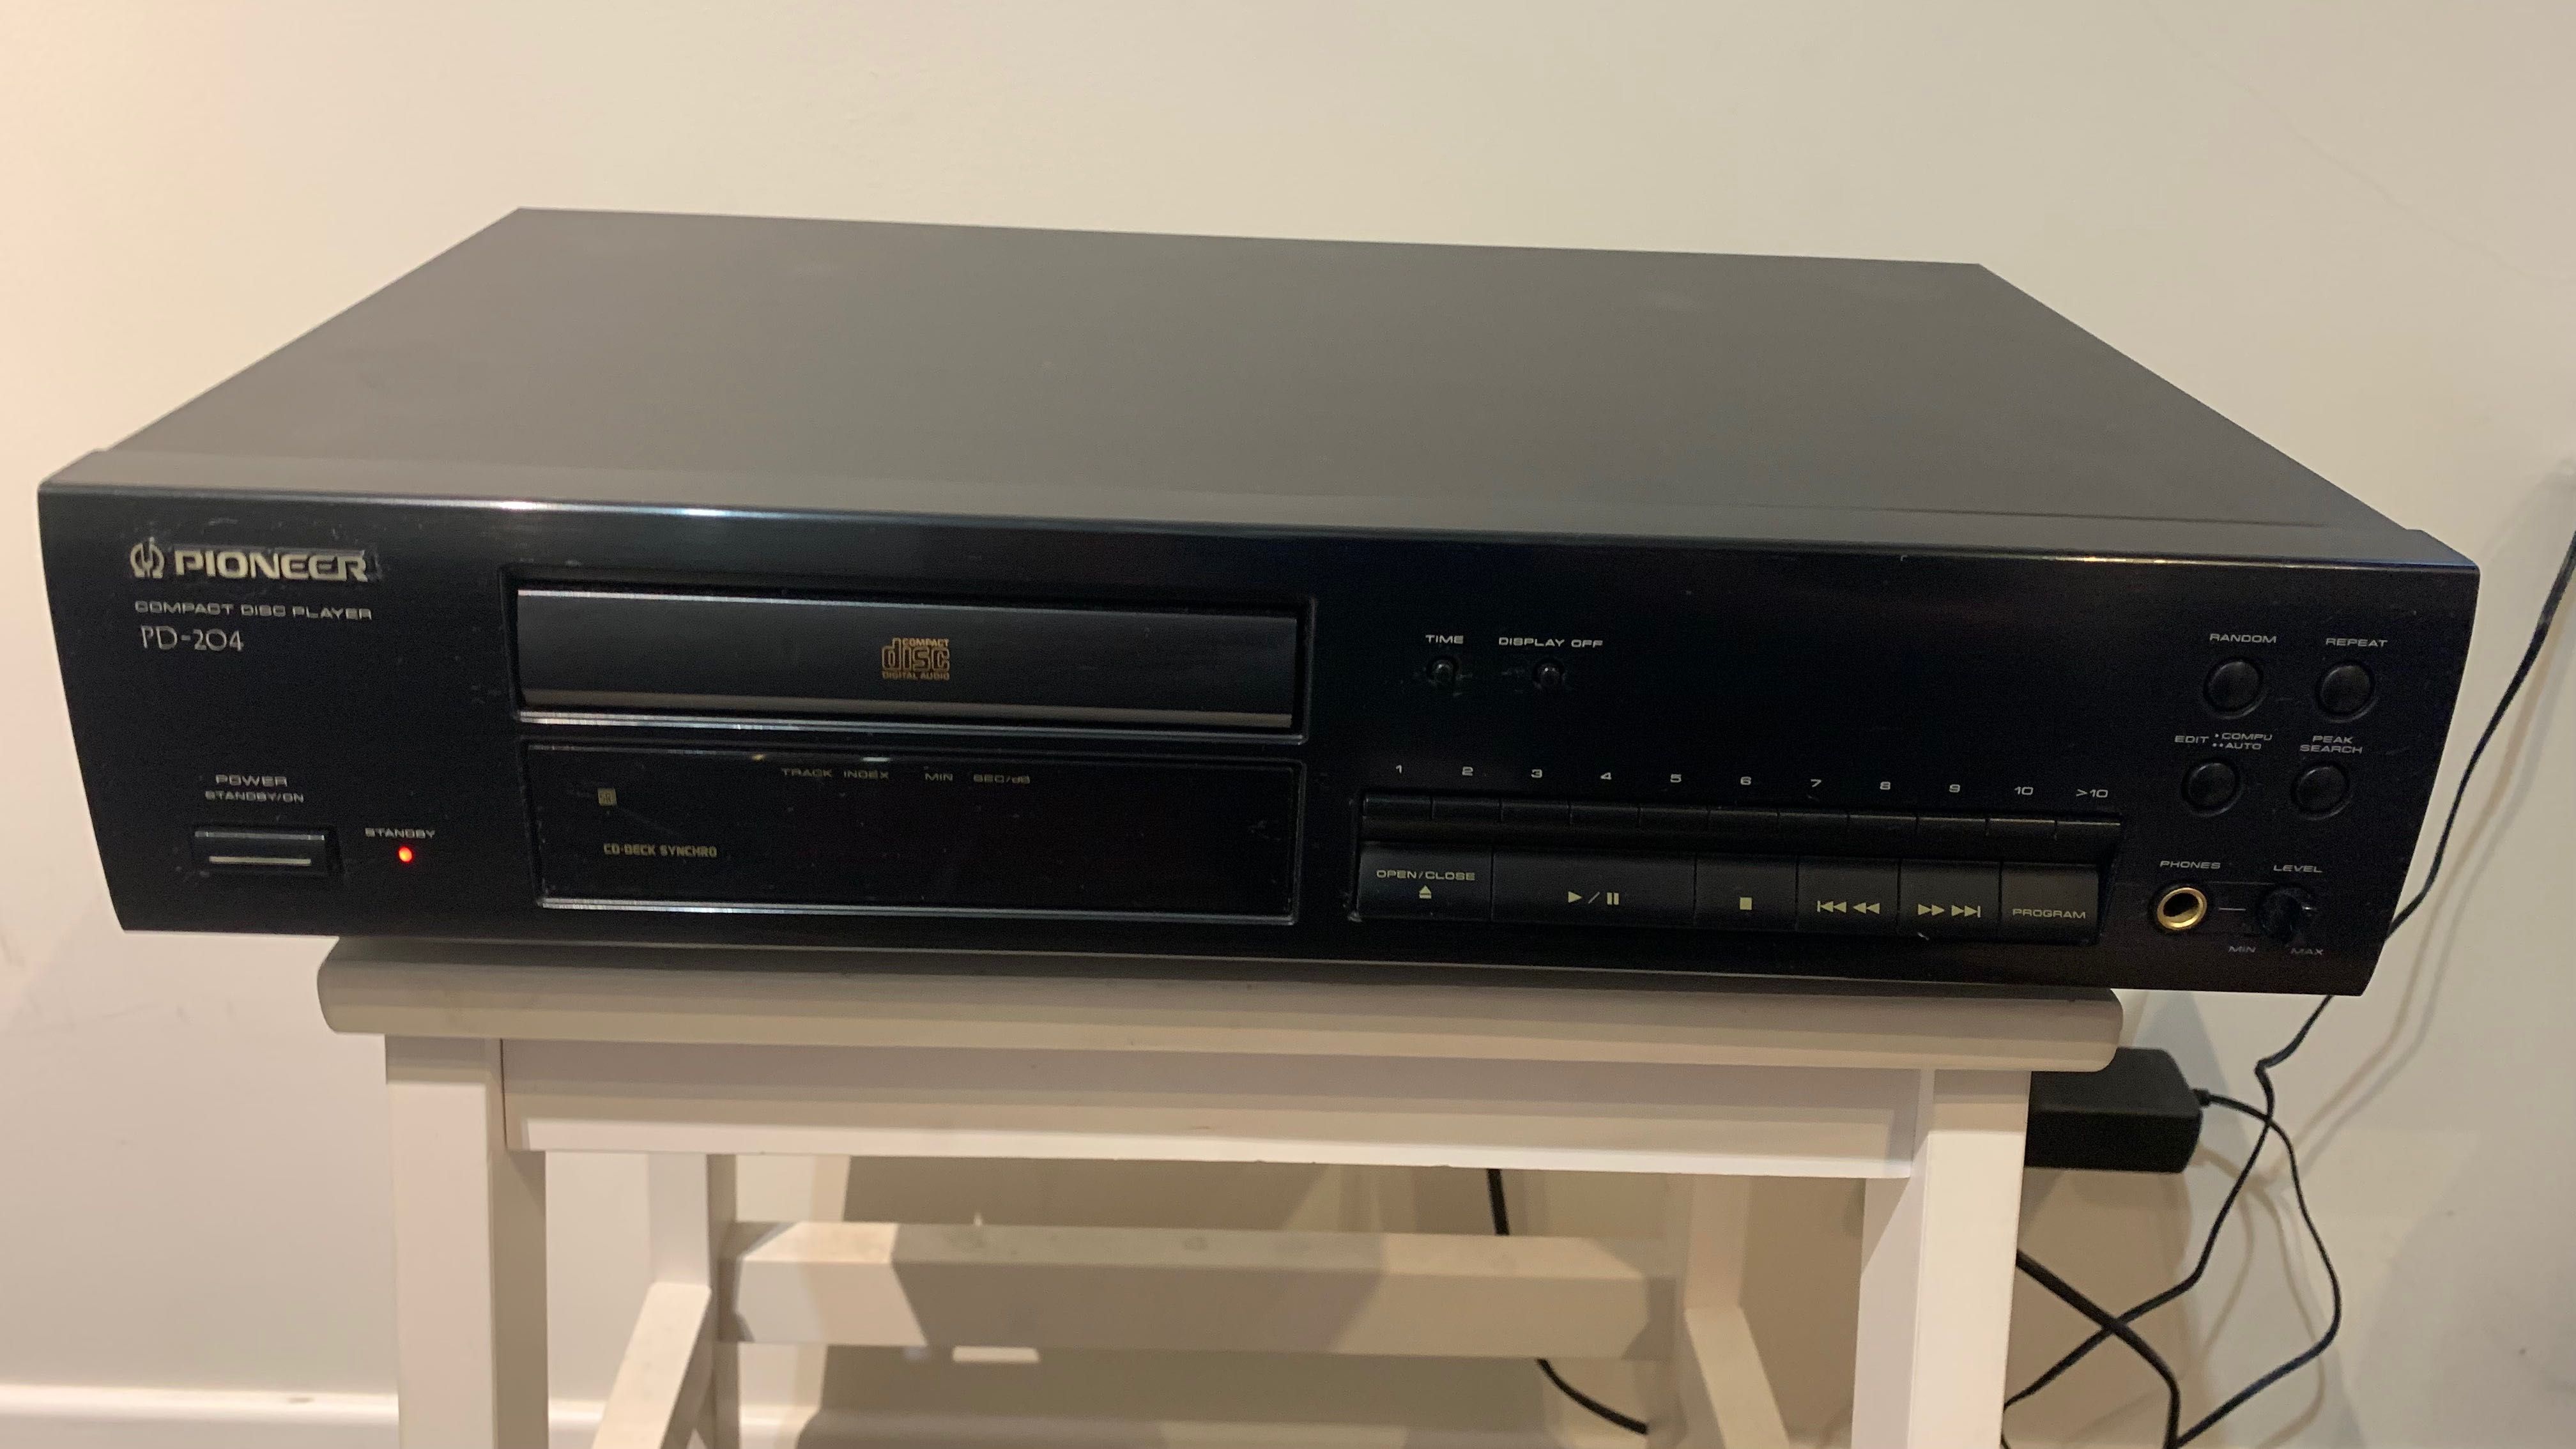 Compact disc Player Pioneer PD 204